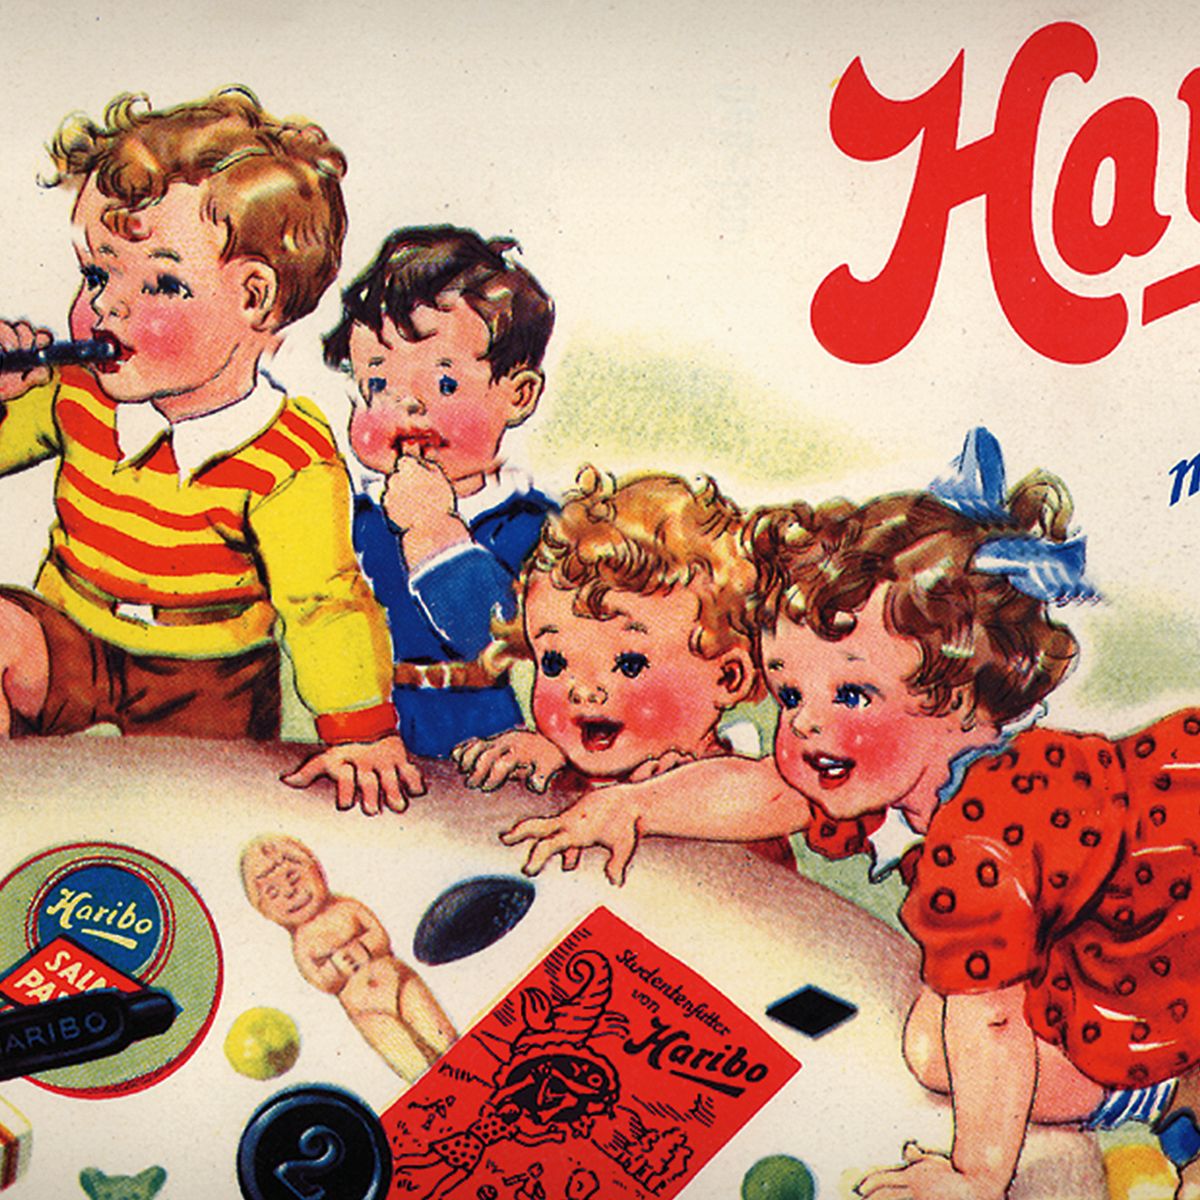 Historic HARIBO advert with children playing